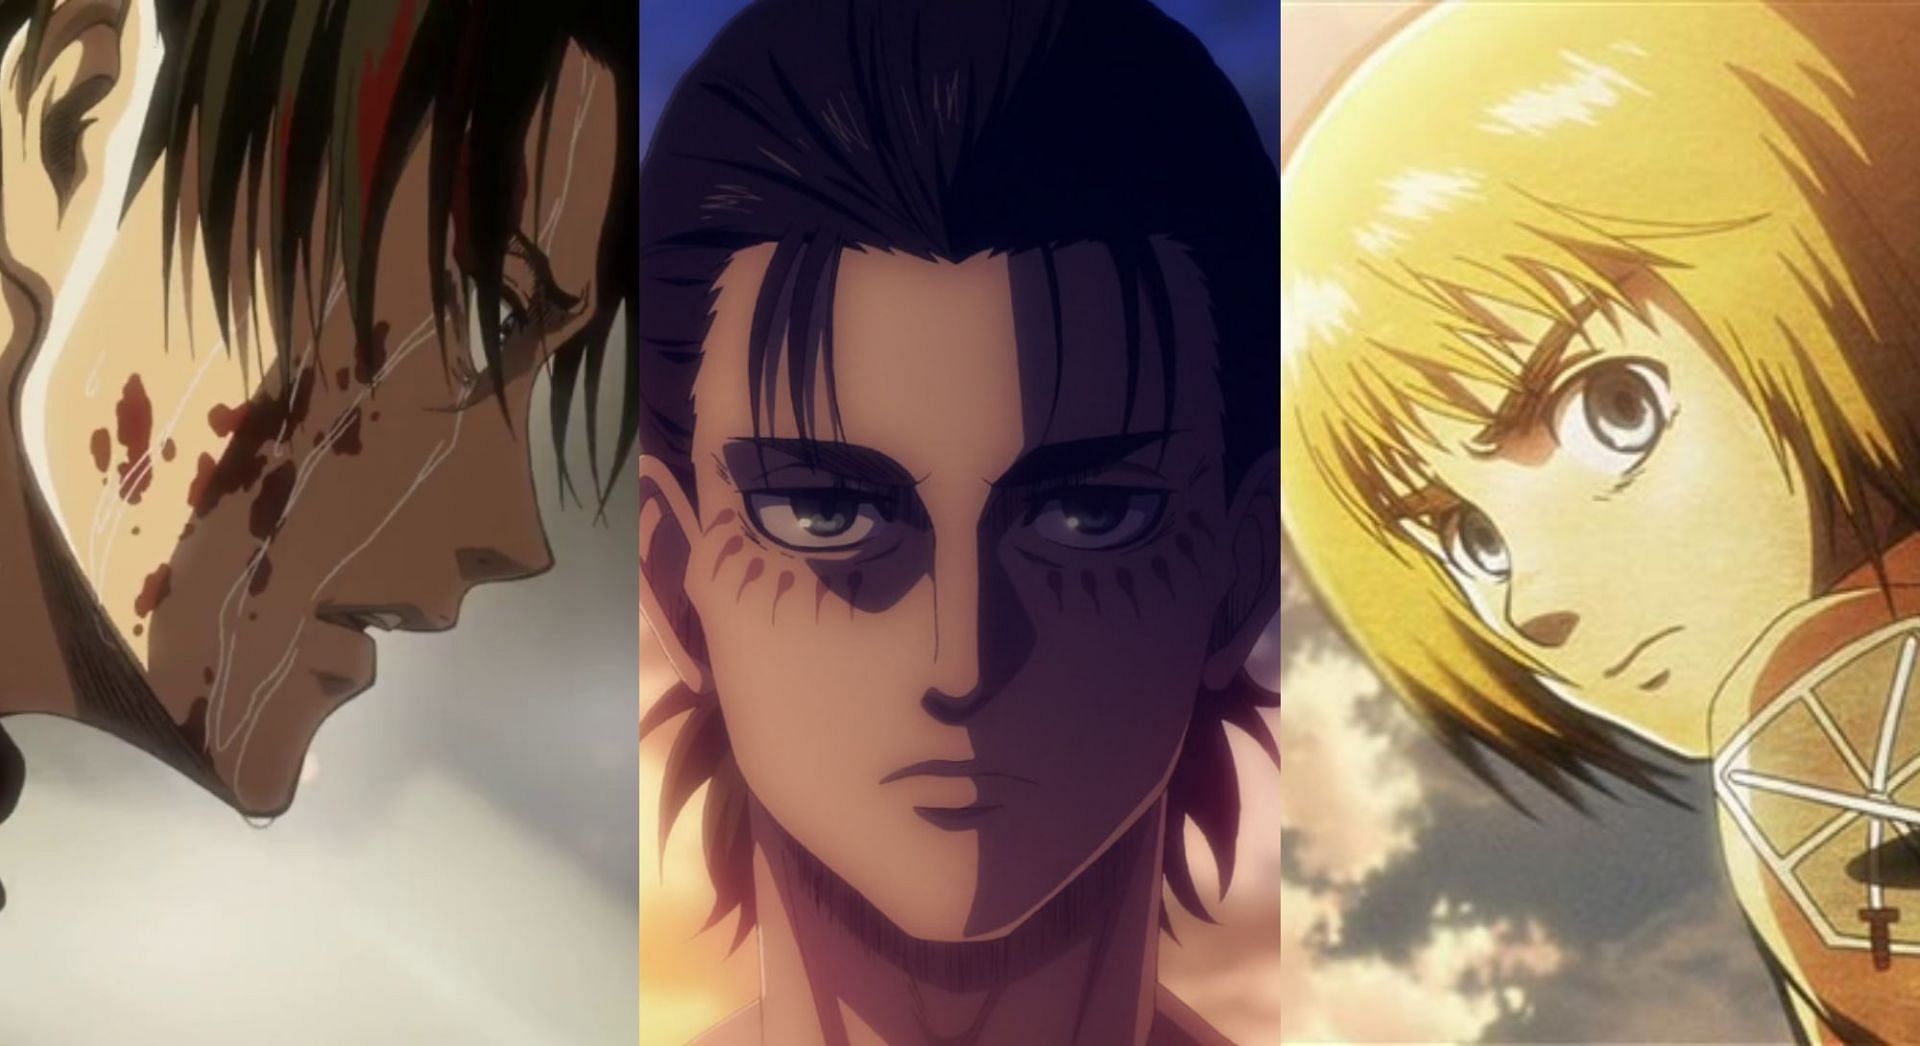 Armin, Levi, and Eren, as seen in Attack on Titan (image via Studio WIT and MAPPA)